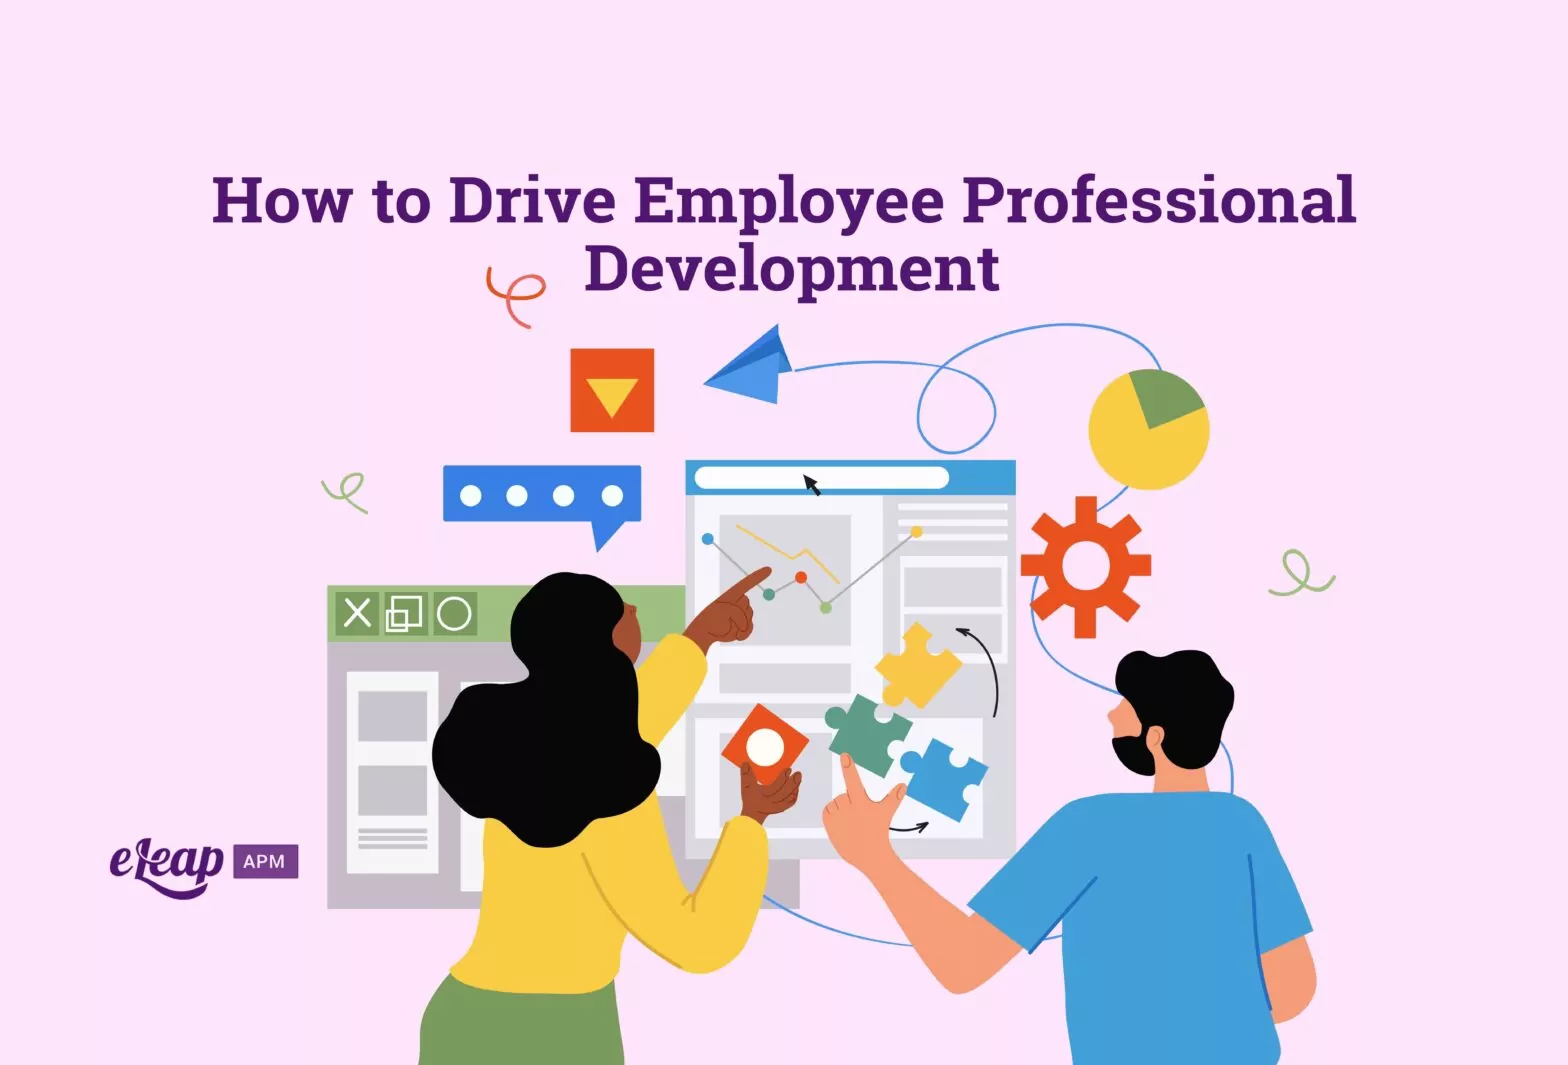 How to Drive Employee Professional Development